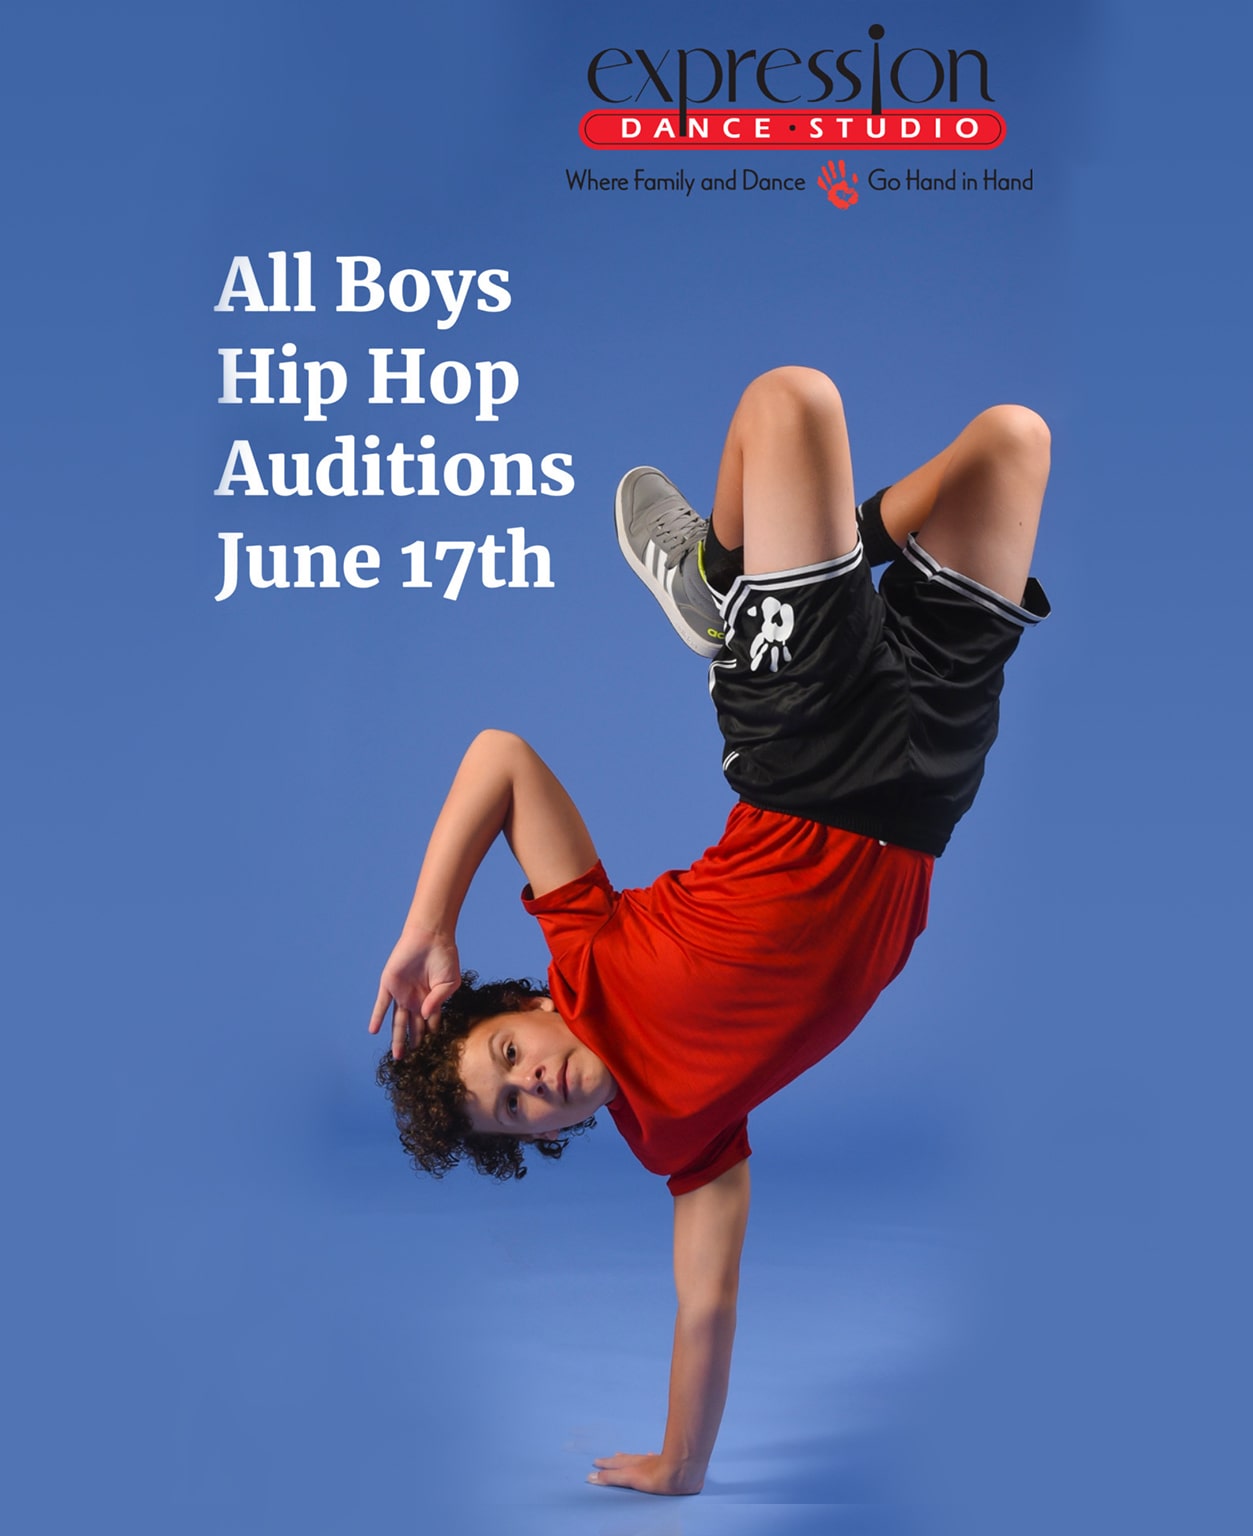 All Boys Hip Hop Auditions - Expression Dance Studio